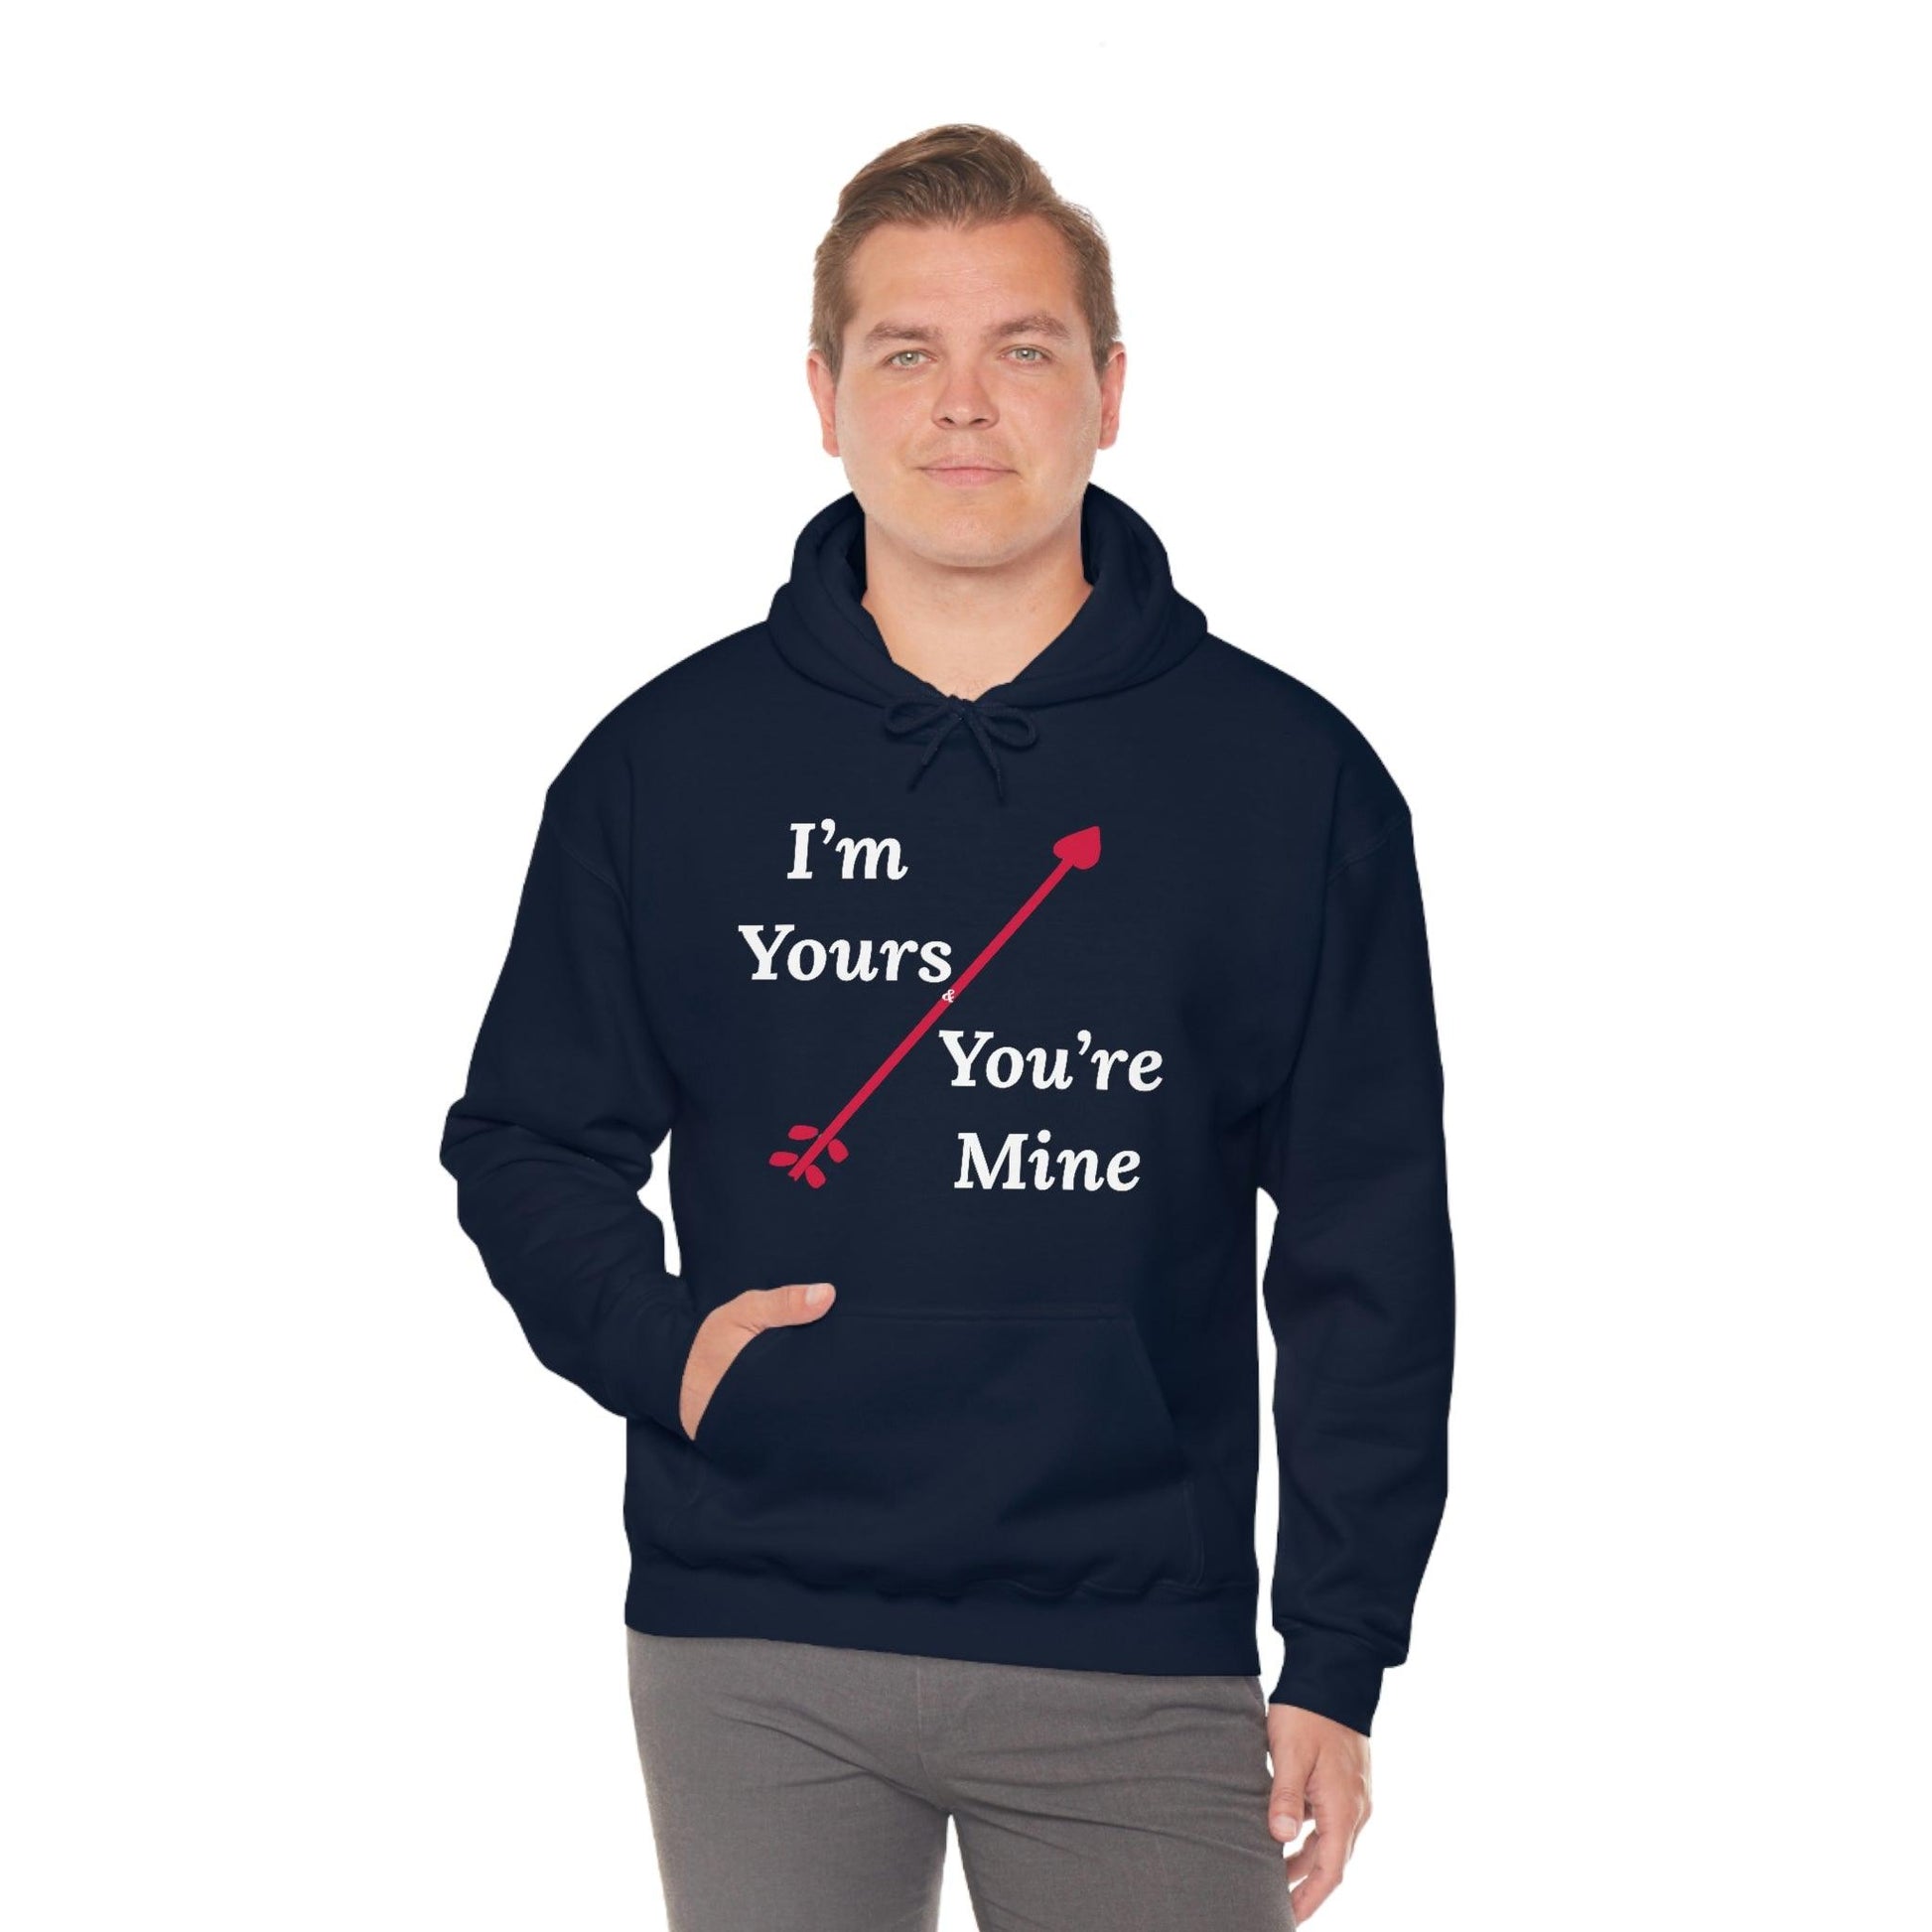 I'm Yours and You're Mine Hooded Sweatshirt - Giftsmojo